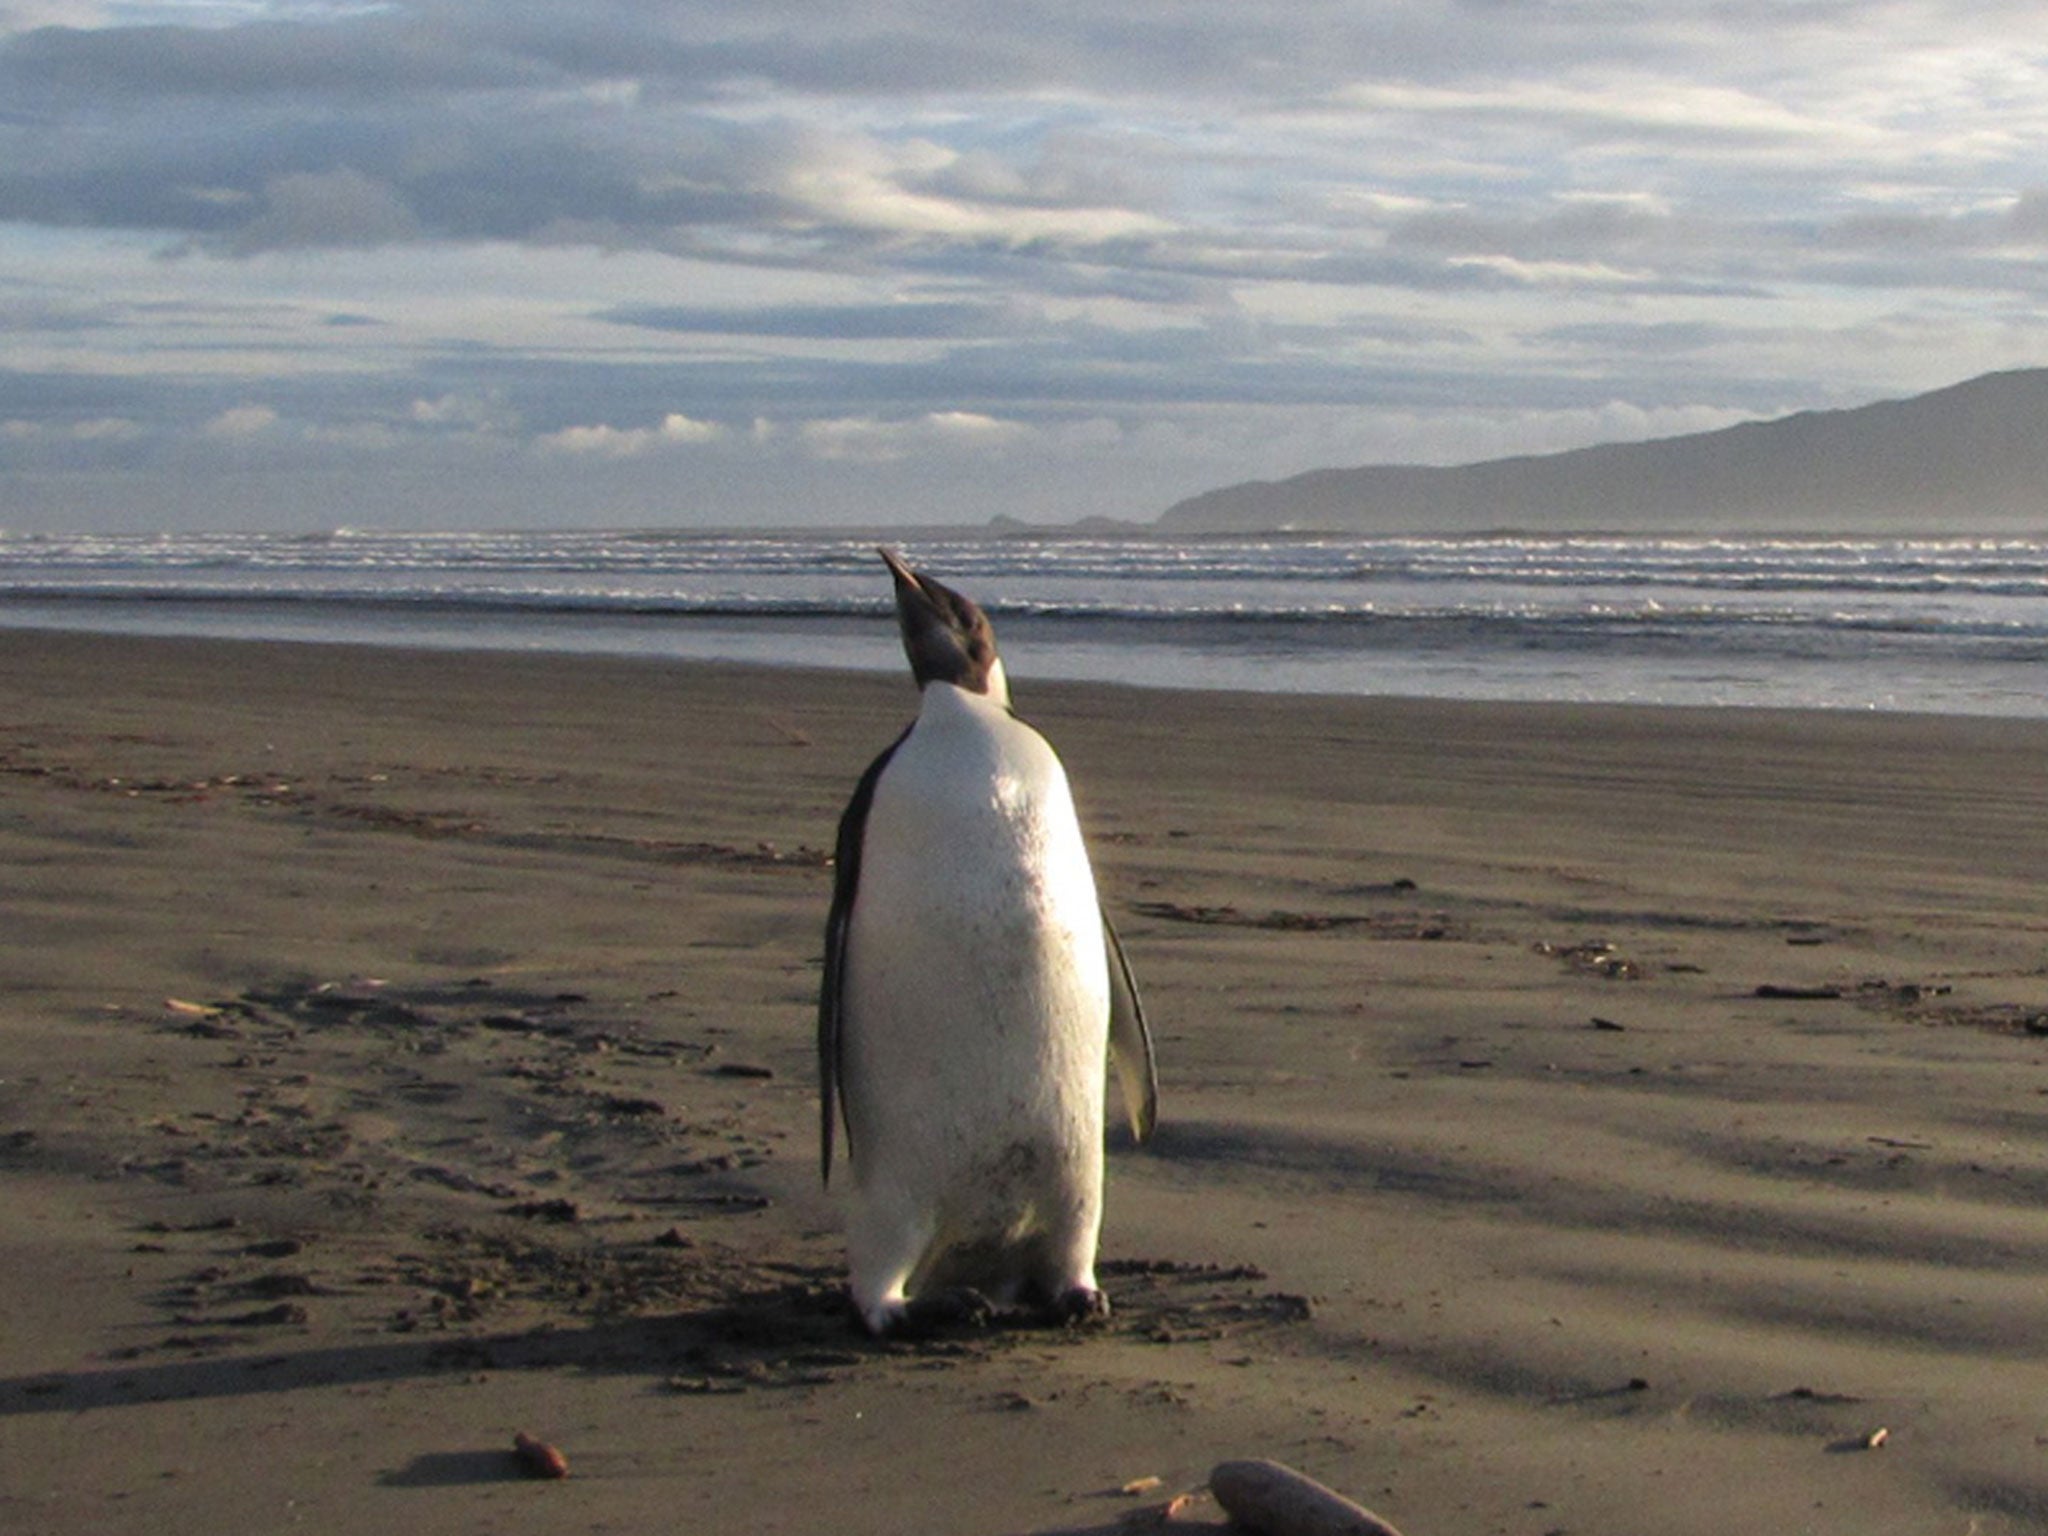 All of the 45 known emperor penguin colonies in Antarctica will be affected by melting sea ice